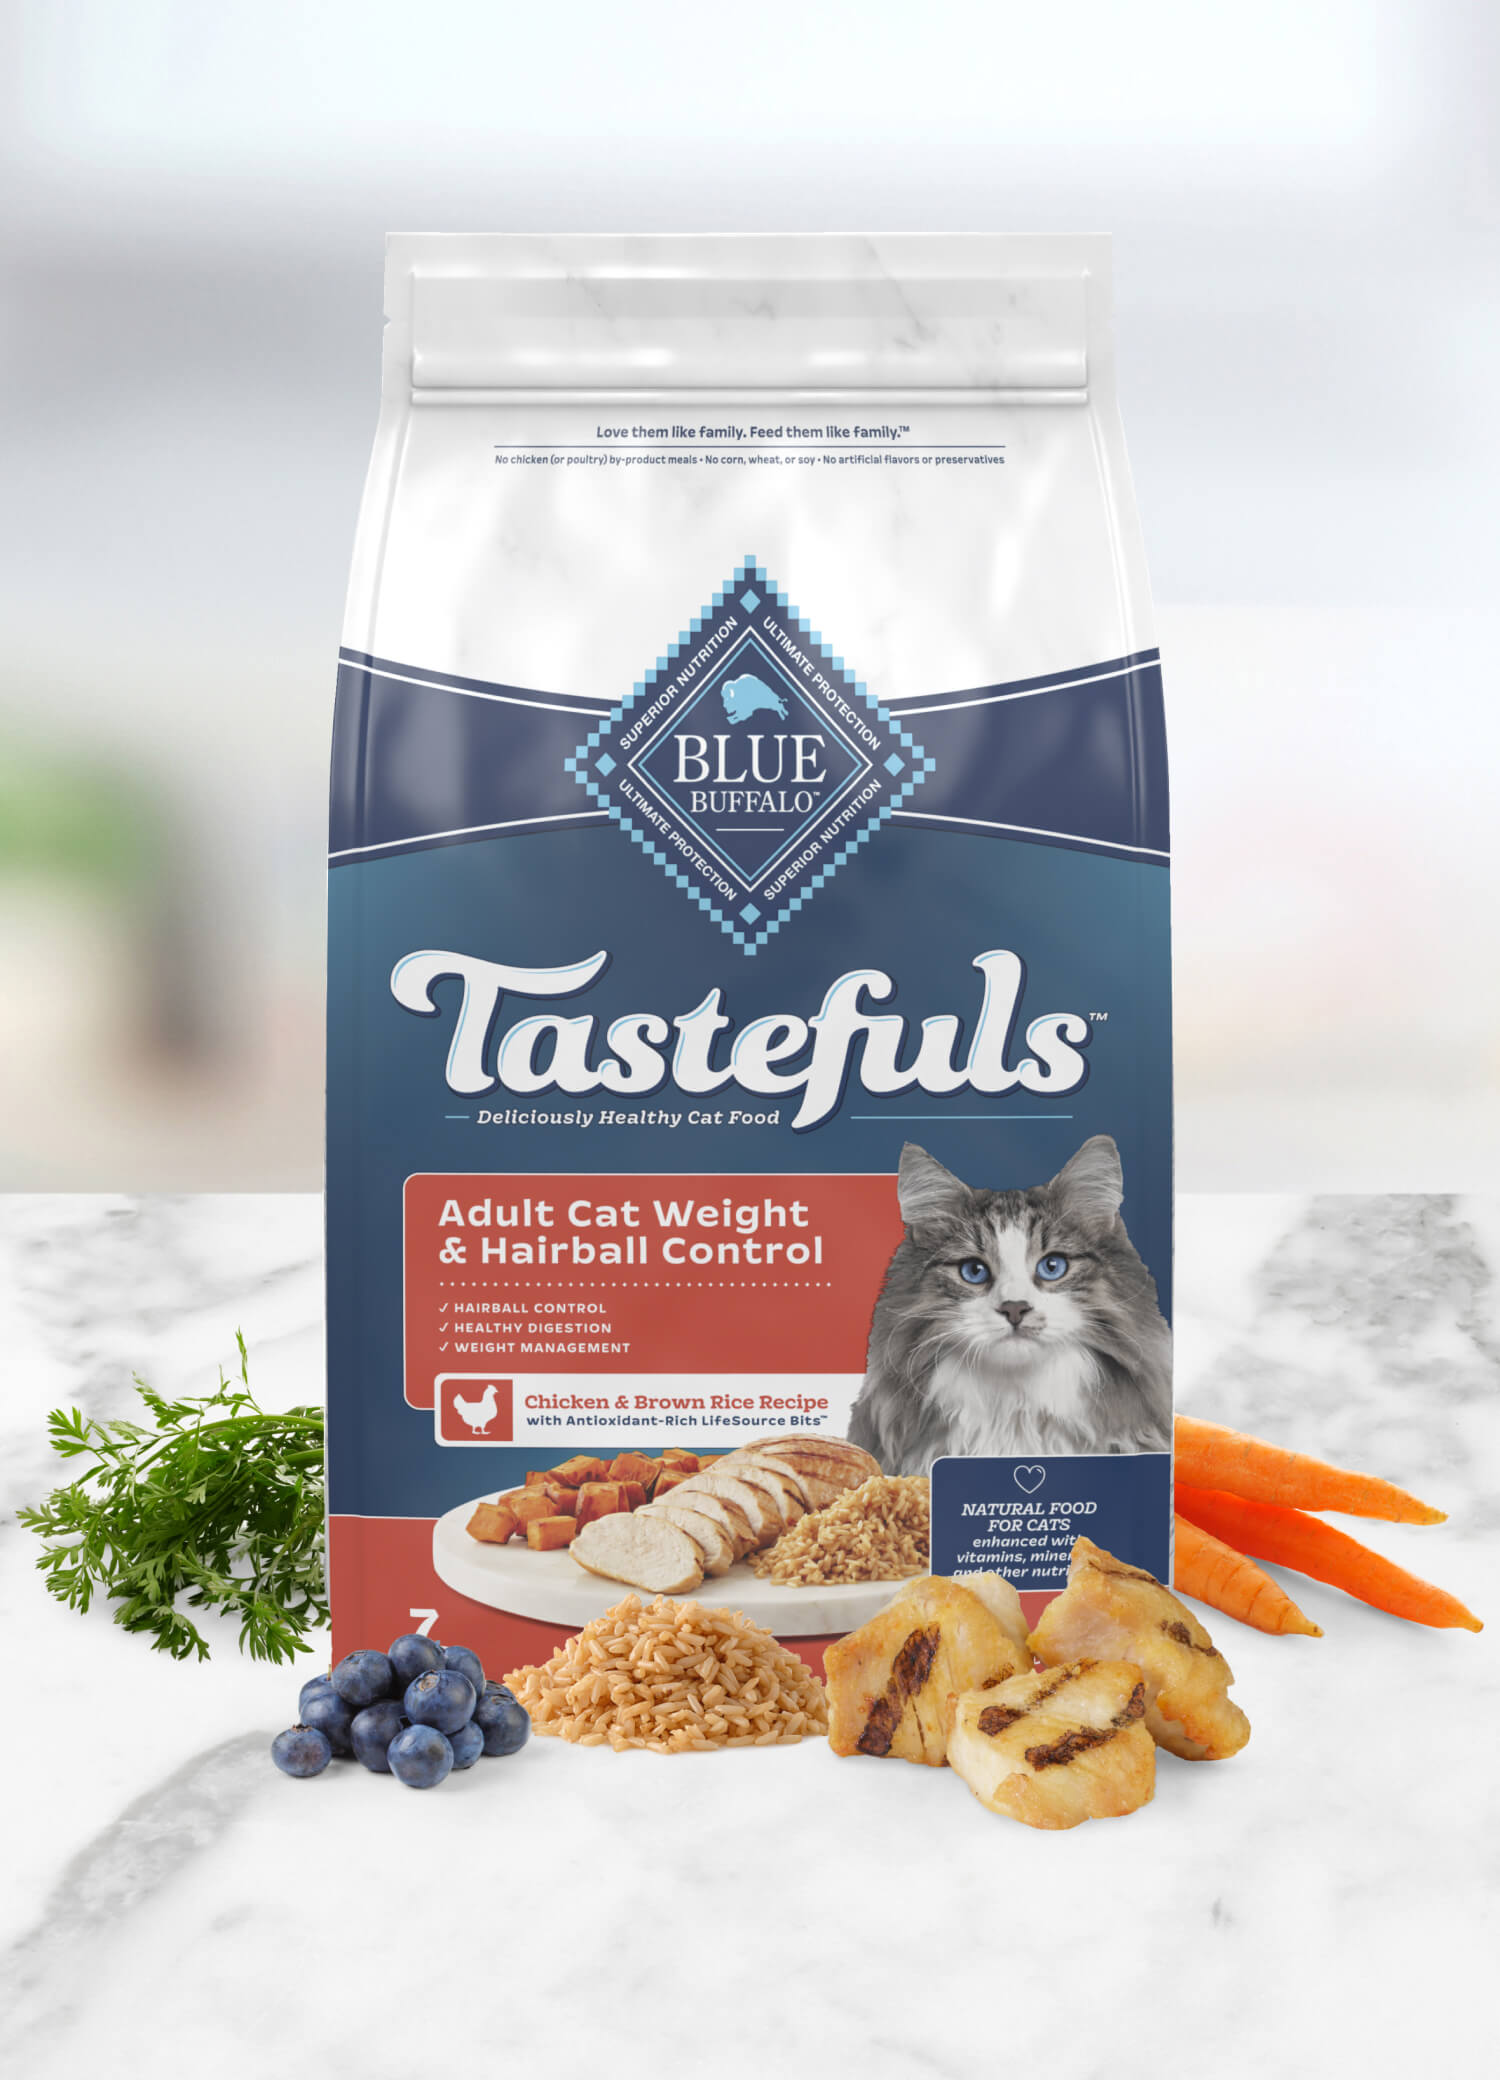 Blue Buffalo Tastefuls cat food bag for adult weight and hairball control, chicken and brown rice recipe, with images of fresh ingredients and a grey cat.